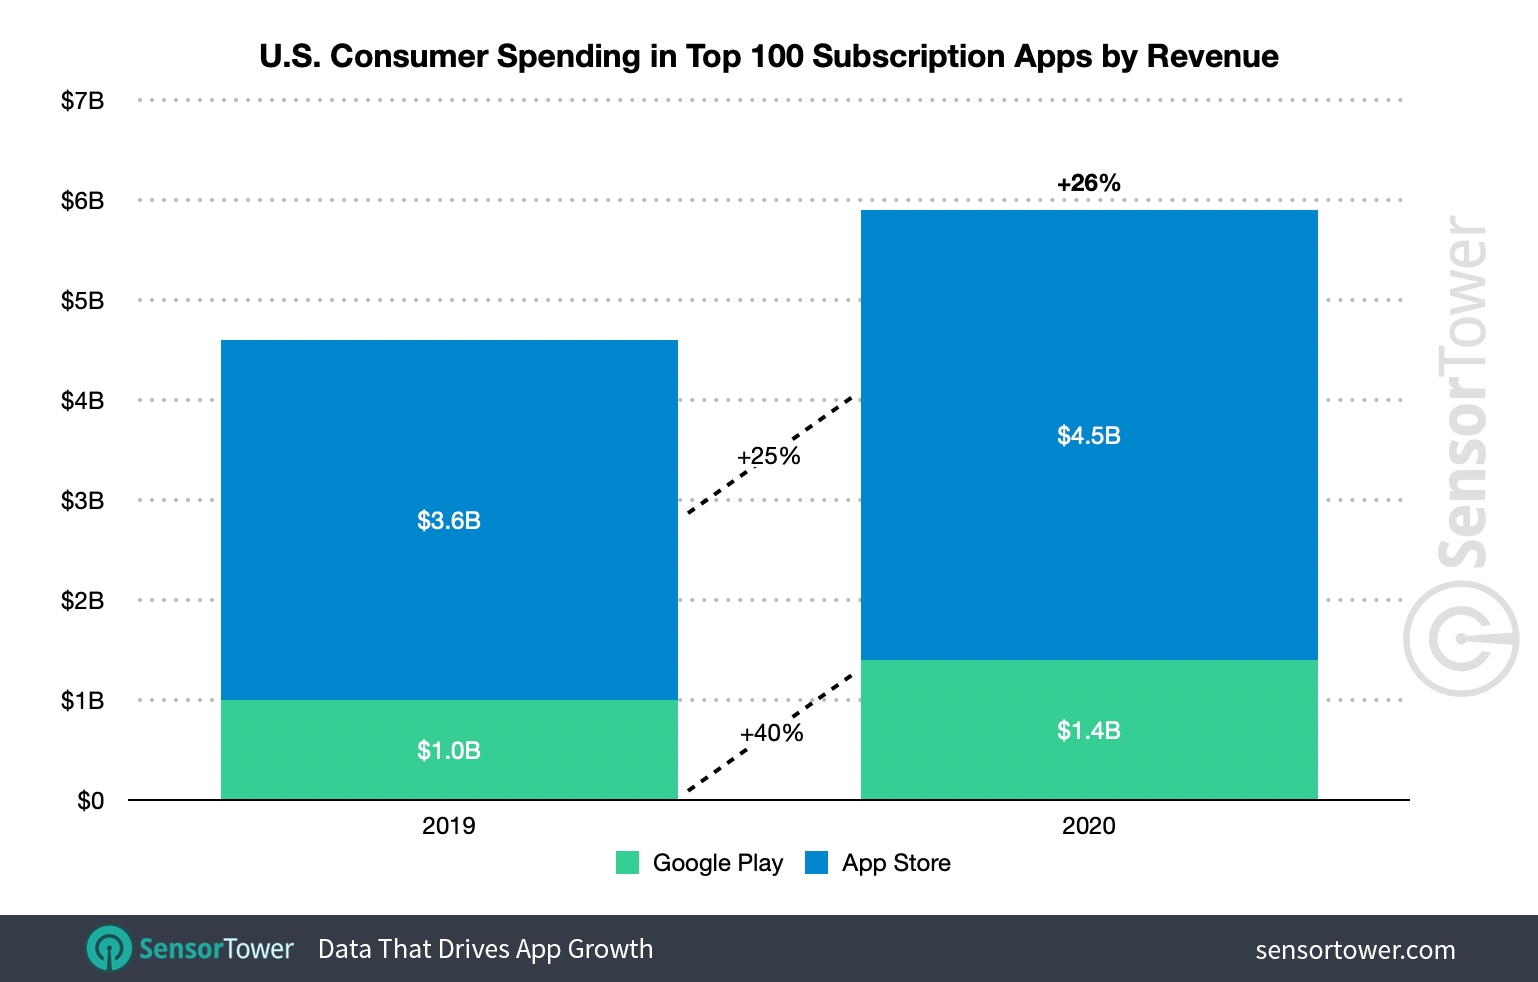 U.S. subscription app spending grew 26 percent to nearly $5.9 billion in 2020